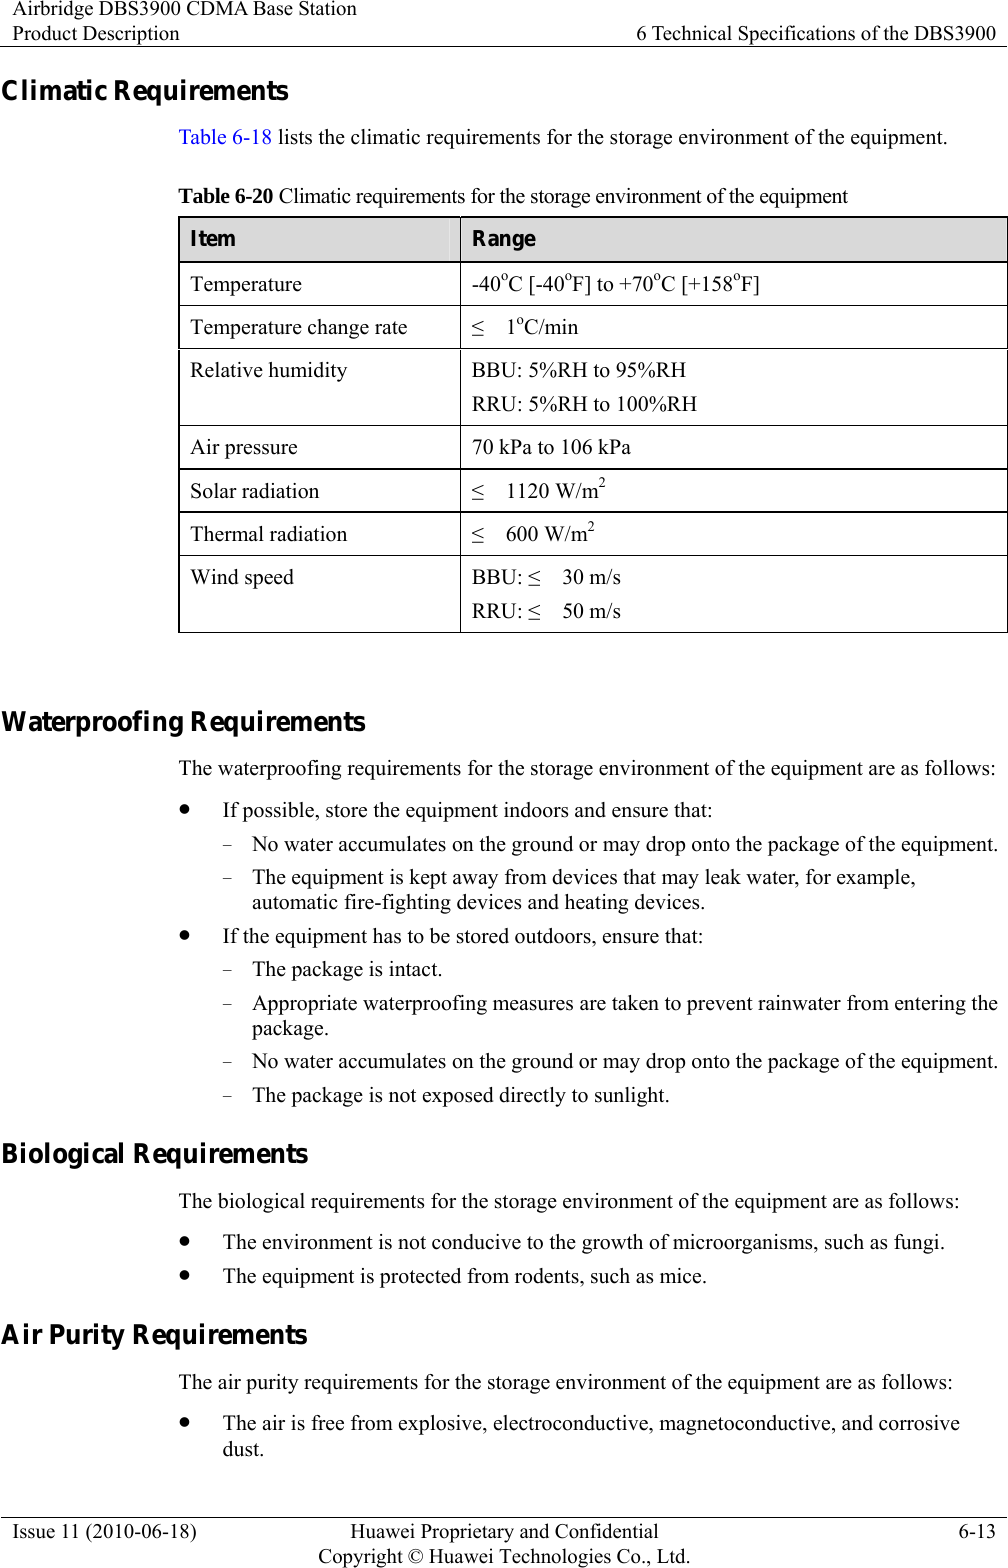 Airbridge DBS3900 CDMA Base Station Product Description  6 Technical Specifications of the DBS3900 Issue 11 (2010-06-18)  Huawei Proprietary and Confidential         Copyright © Huawei Technologies Co., Ltd.6-13 Climatic Requirements Table 6-18 lists the climatic requirements for the storage environment of the equipment. Table 6-20 Climatic requirements for the storage environment of the equipment Item  Range Temperature -40oC [-40oF] to +70oC [+158oF] Temperature change rate  ≤  1oC/min Relative humidity  BBU: 5%RH to 95%RH RRU: 5%RH to 100%RH Air pressure  70 kPa to 106 kPa Solar radiation  ≤  1120 W/m2 Thermal radiation  ≤  600 W/m2 Wind speed  BBU: ≤  30 m/s RRU: ≤  50 m/s  Waterproofing Requirements The waterproofing requirements for the storage environment of the equipment are as follows: z If possible, store the equipment indoors and ensure that: − No water accumulates on the ground or may drop onto the package of the equipment. − The equipment is kept away from devices that may leak water, for example, automatic fire-fighting devices and heating devices. z If the equipment has to be stored outdoors, ensure that: − The package is intact. − Appropriate waterproofing measures are taken to prevent rainwater from entering the package. − No water accumulates on the ground or may drop onto the package of the equipment. − The package is not exposed directly to sunlight. Biological Requirements The biological requirements for the storage environment of the equipment are as follows: z The environment is not conducive to the growth of microorganisms, such as fungi. z The equipment is protected from rodents, such as mice. Air Purity Requirements The air purity requirements for the storage environment of the equipment are as follows: z The air is free from explosive, electroconductive, magnetoconductive, and corrosive dust. 